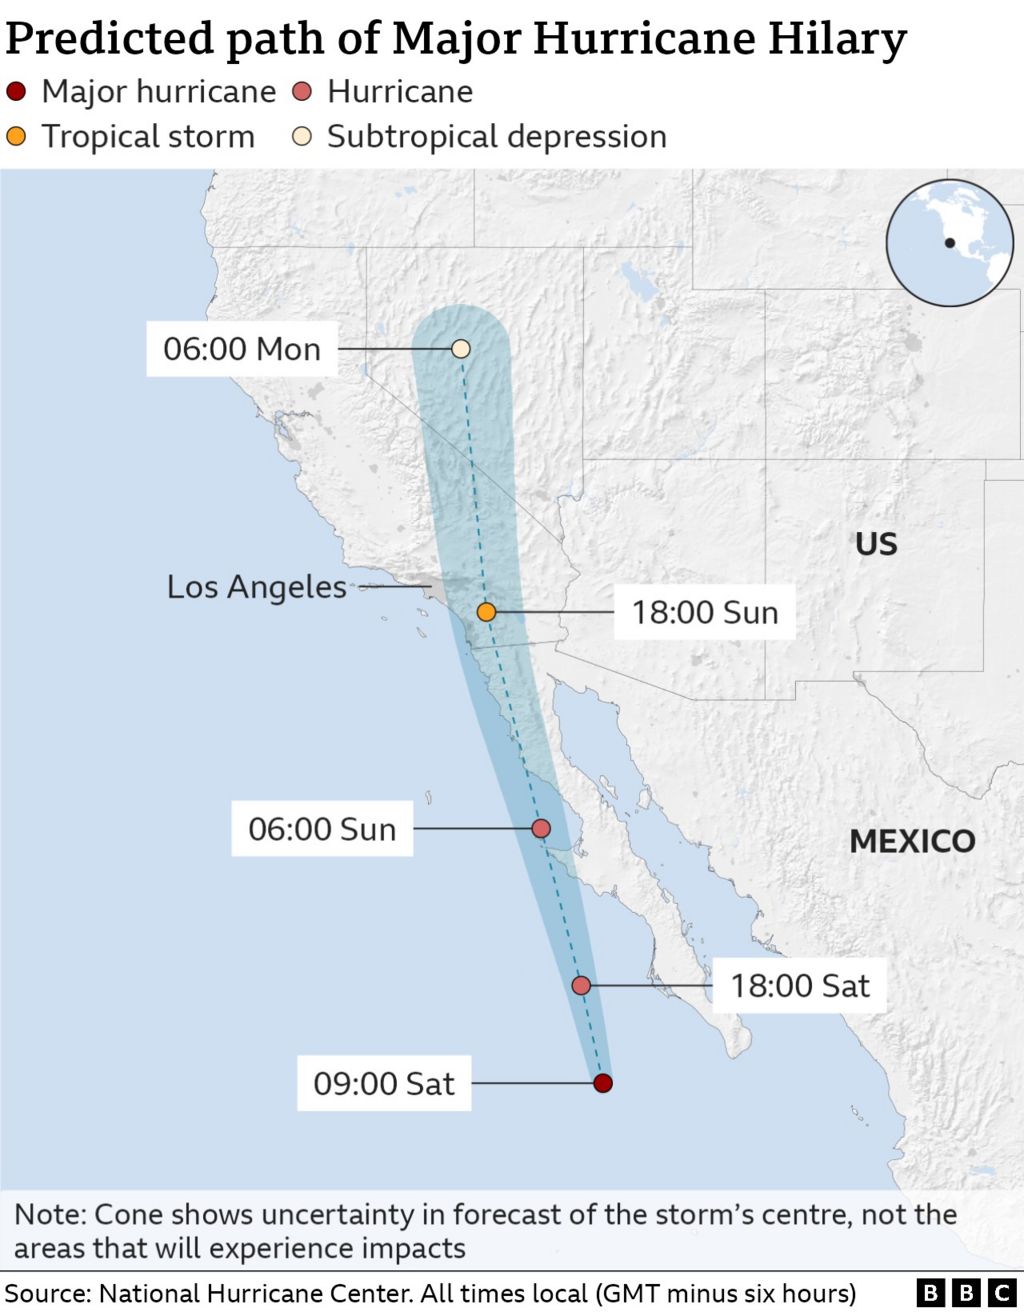 Map shows the predicted path of Hurricane Hilary. It moves north from the coast of Mexico (09:00 on Saturday), making landfall (06:00 on Sunday), continuing through the US state of California (late on Sunday and into Monday)